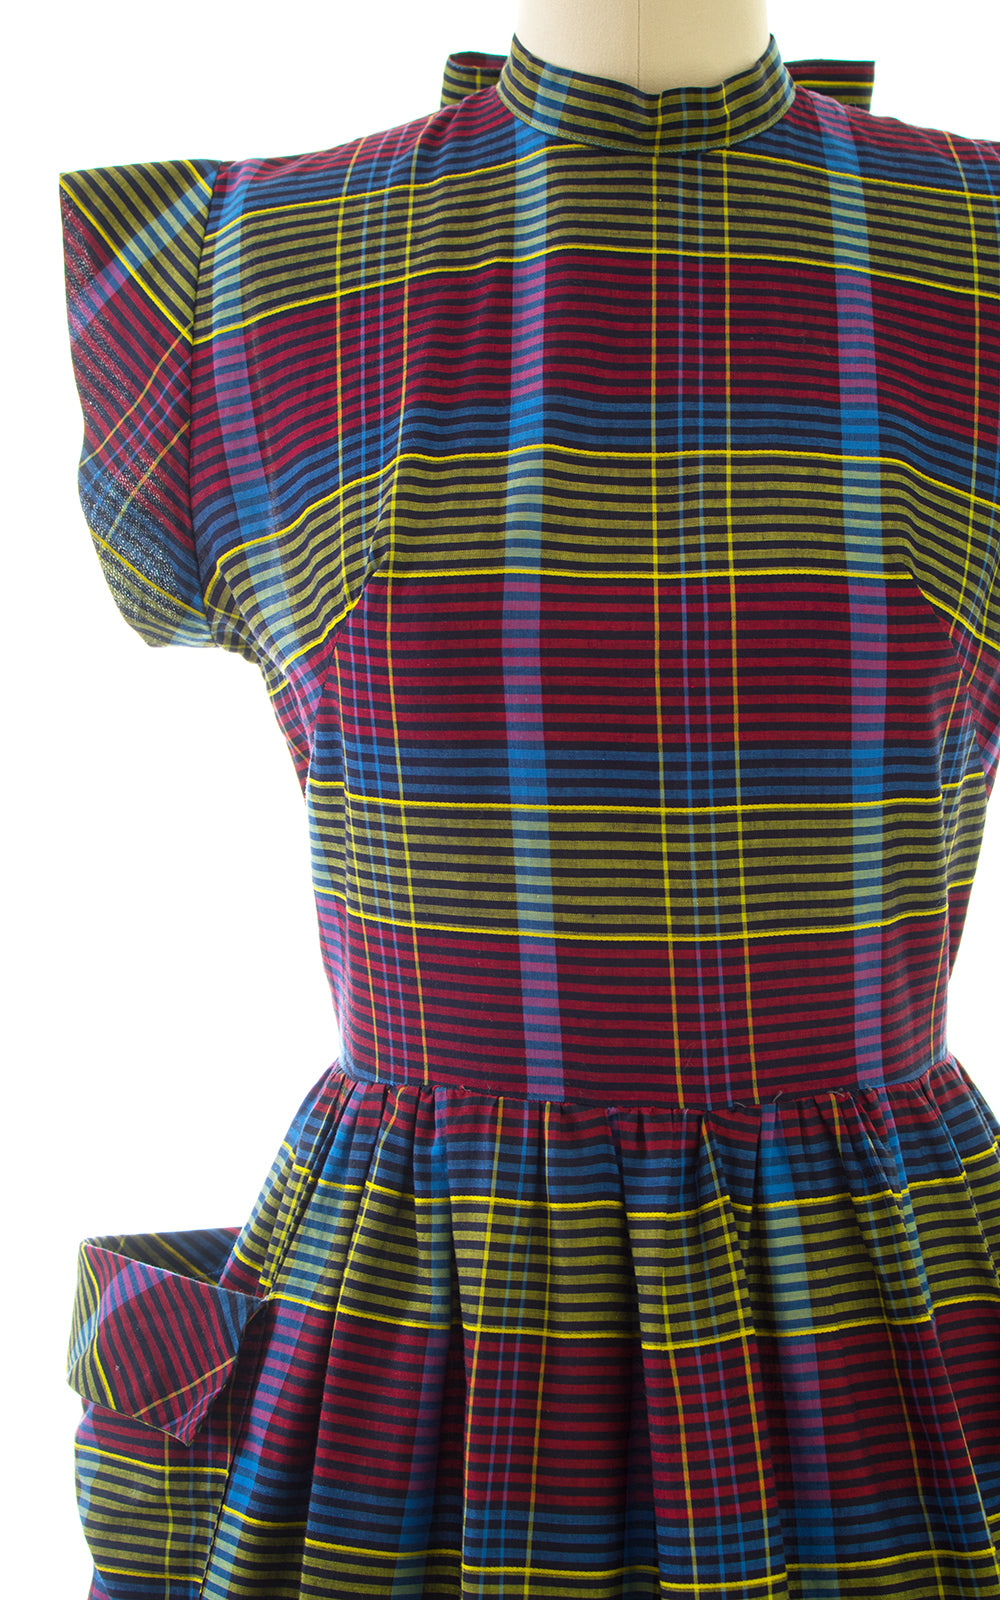 1950s Plaid Cotton Dress with Pockets